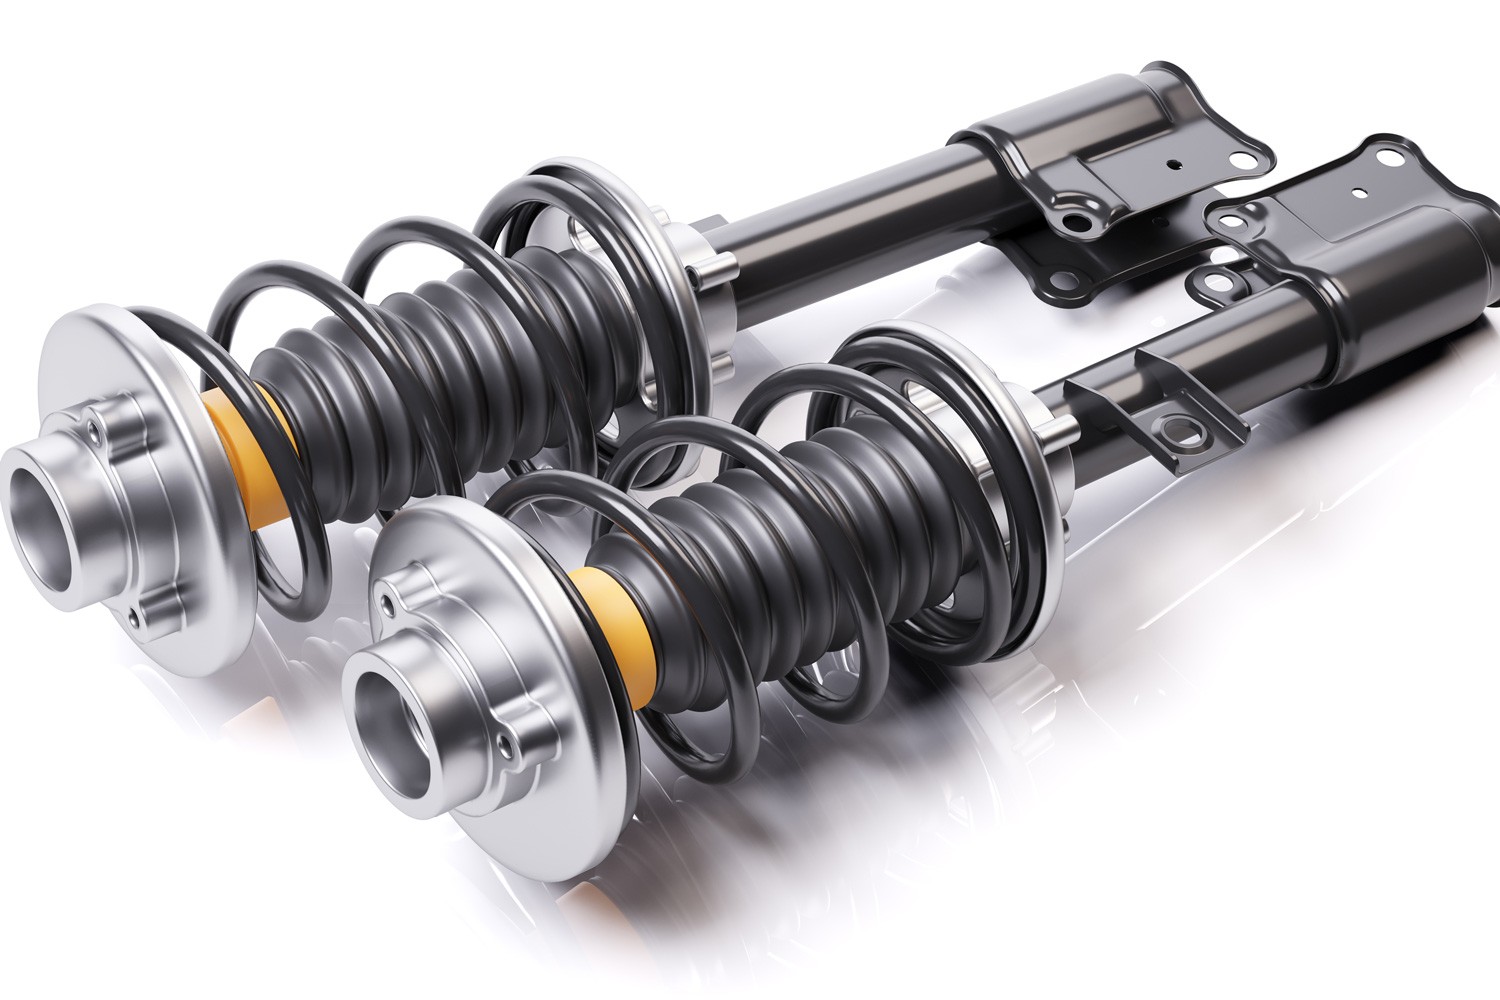 Pair of car shock absorbers with springs. Suspension components